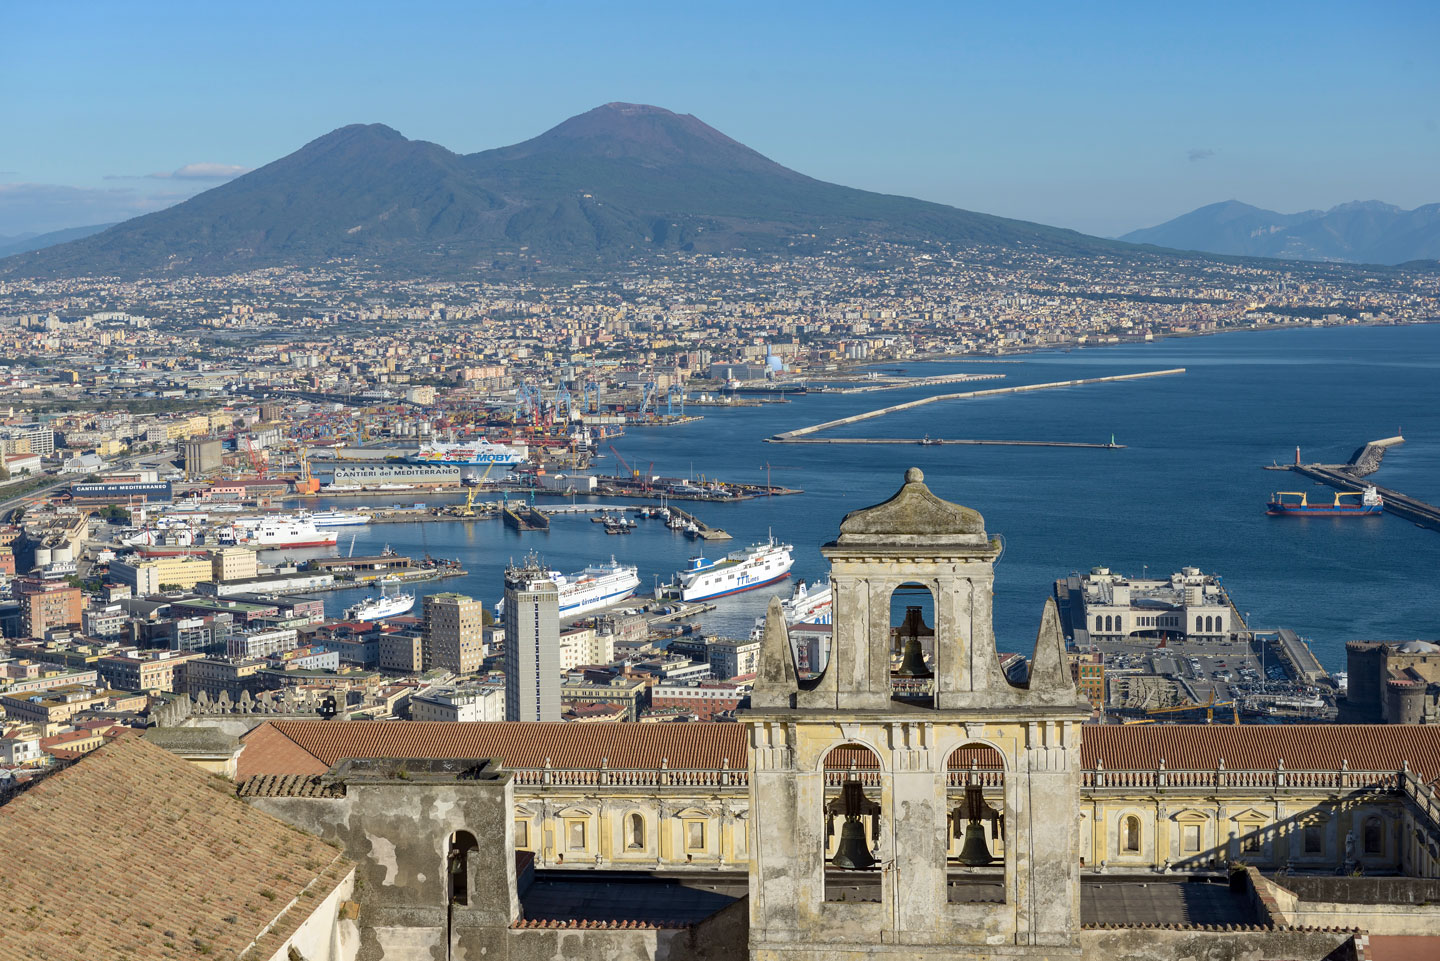 The port of Naples, Italy's southern capital on the Mediterranean Sea